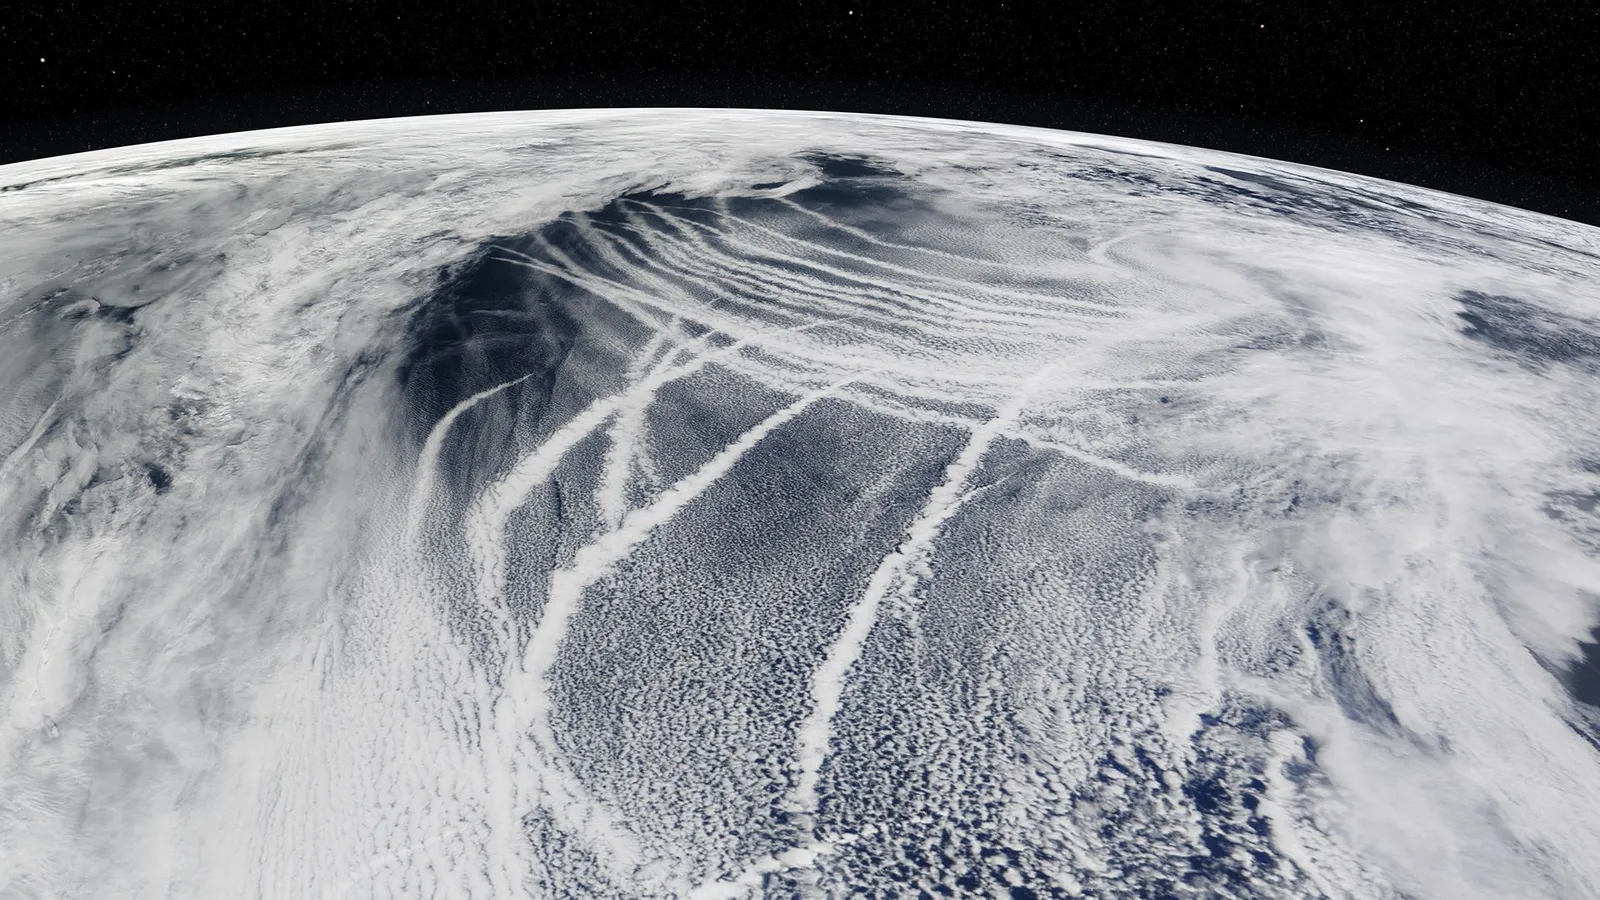 Pollutions trails left by ship viewed from a satellite brightening clouds.